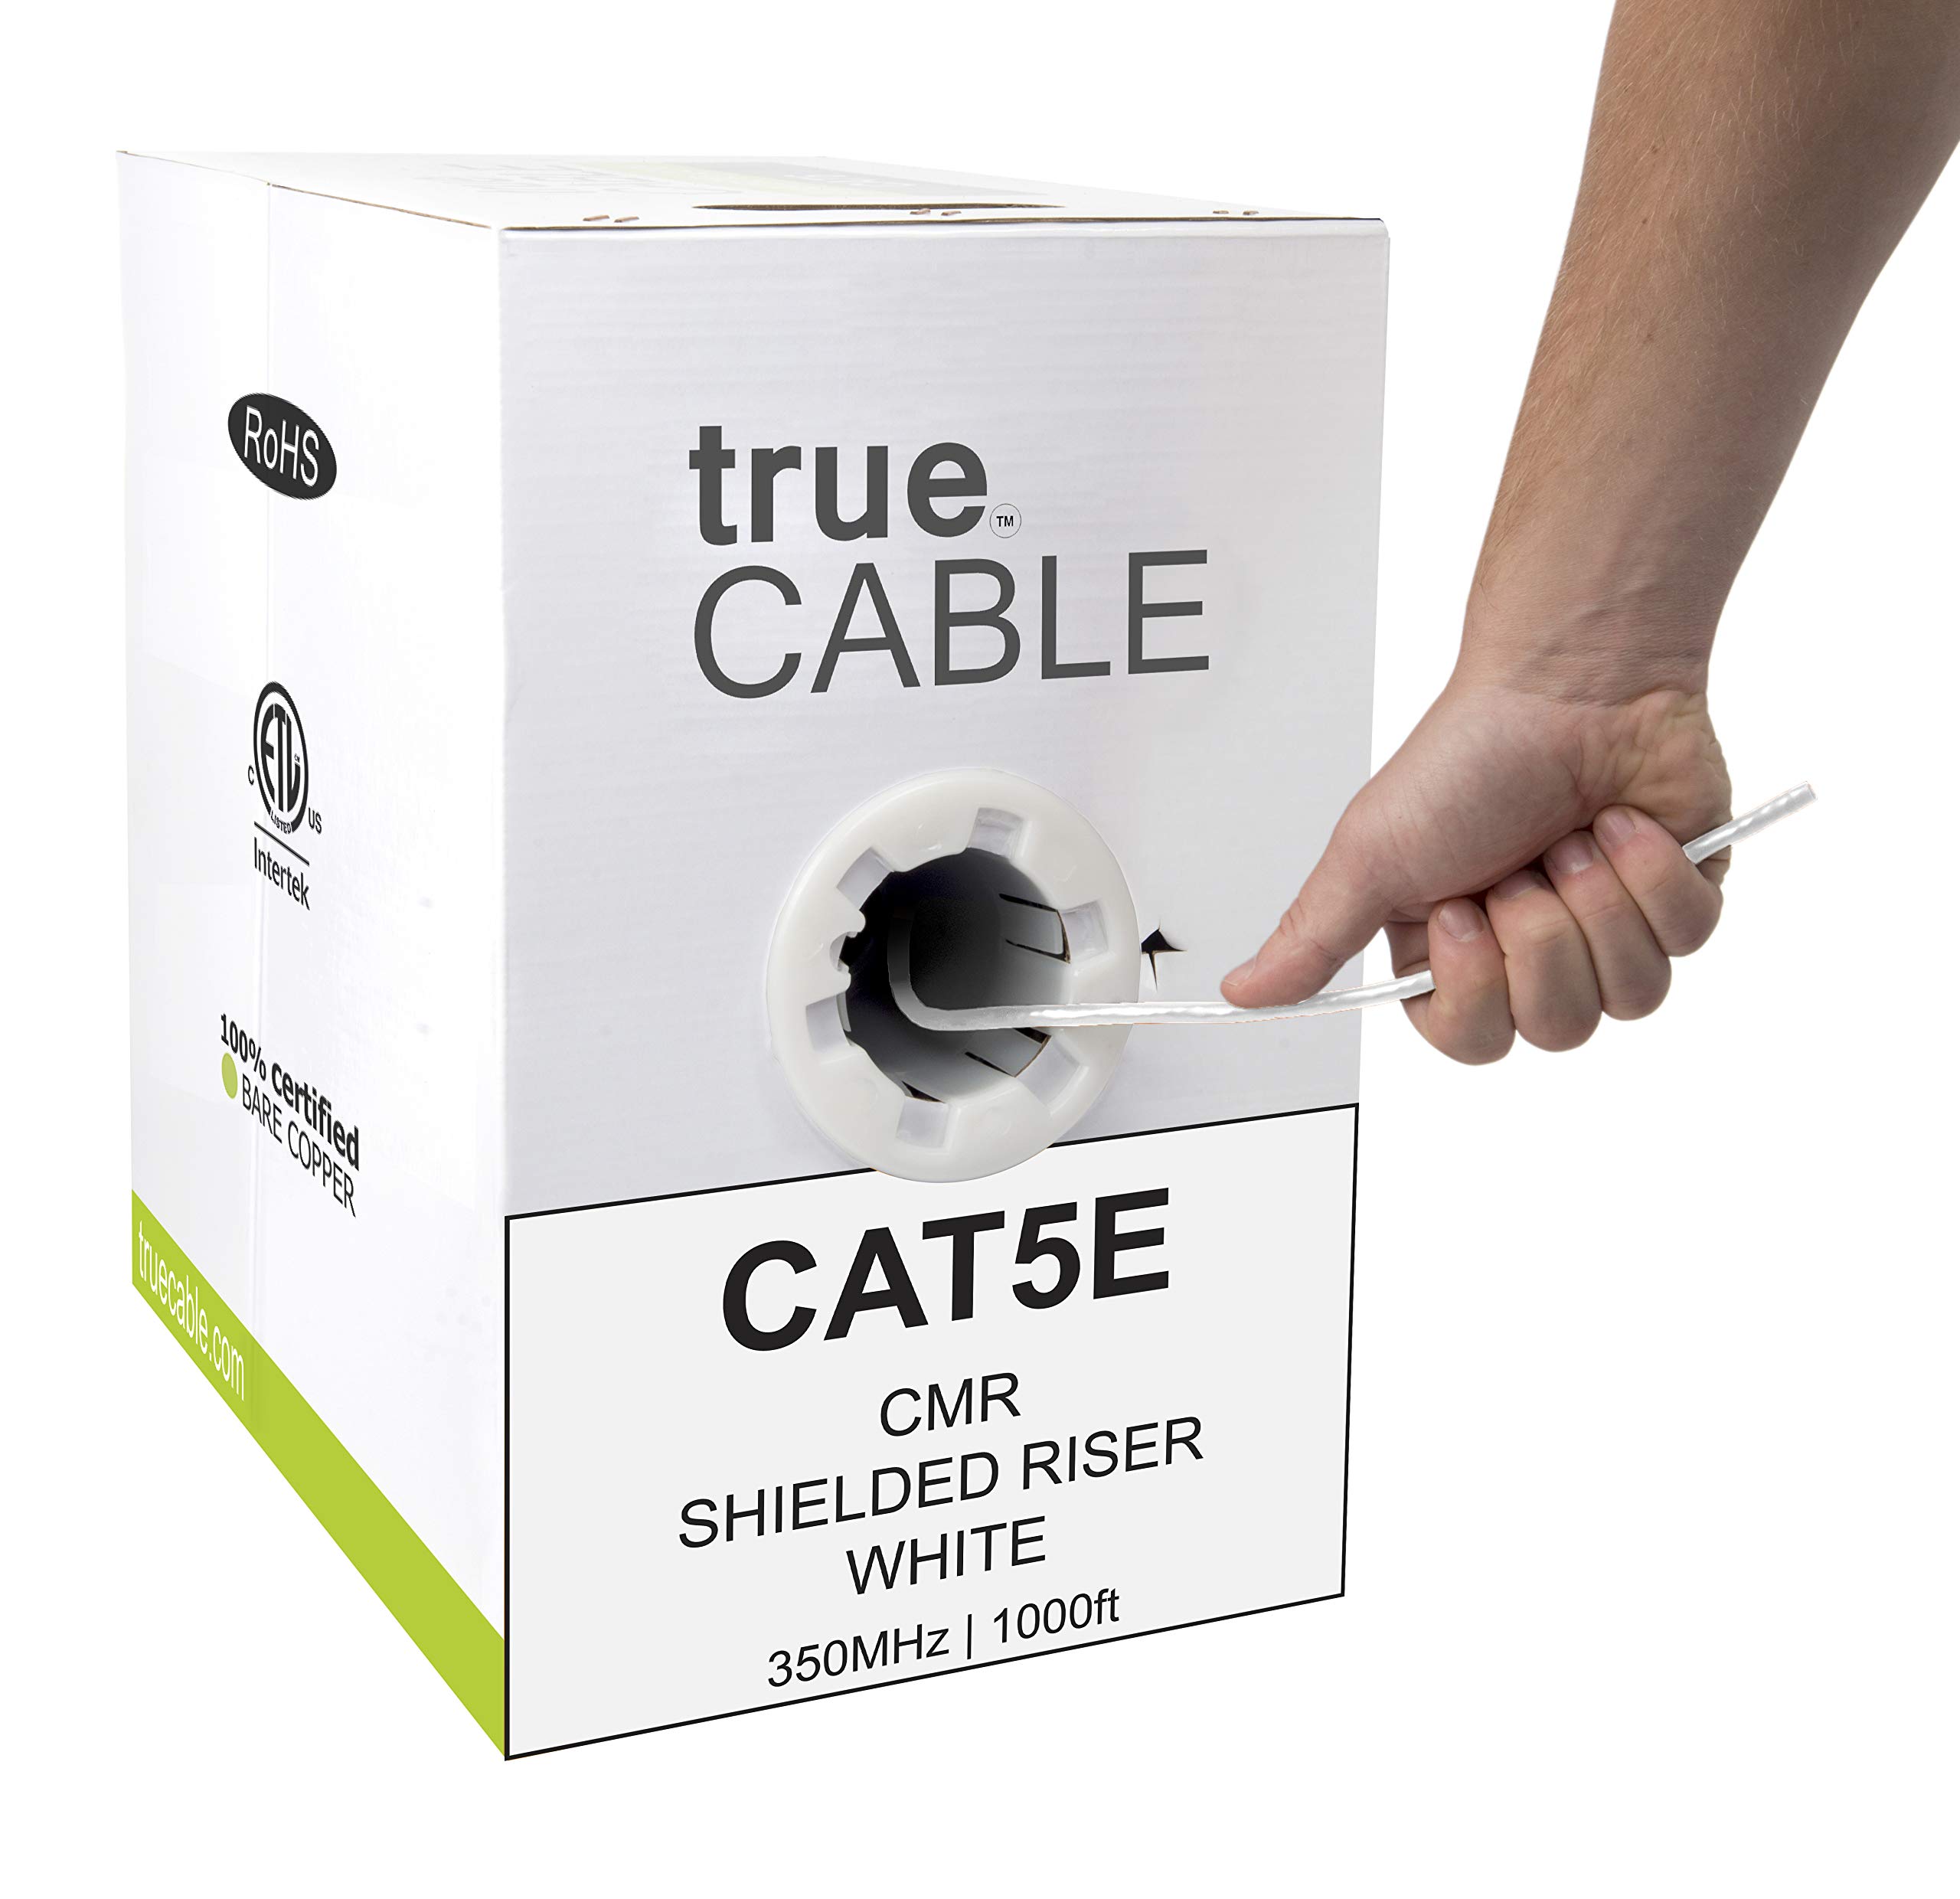 True Cable truecABLE cat5e Shielded Riser (cMR), 1000ft, White, 24AWg Solid Bare copper, 350MHz, PoE++ (4PPoE), ETL Listed, Overall Foil Sh